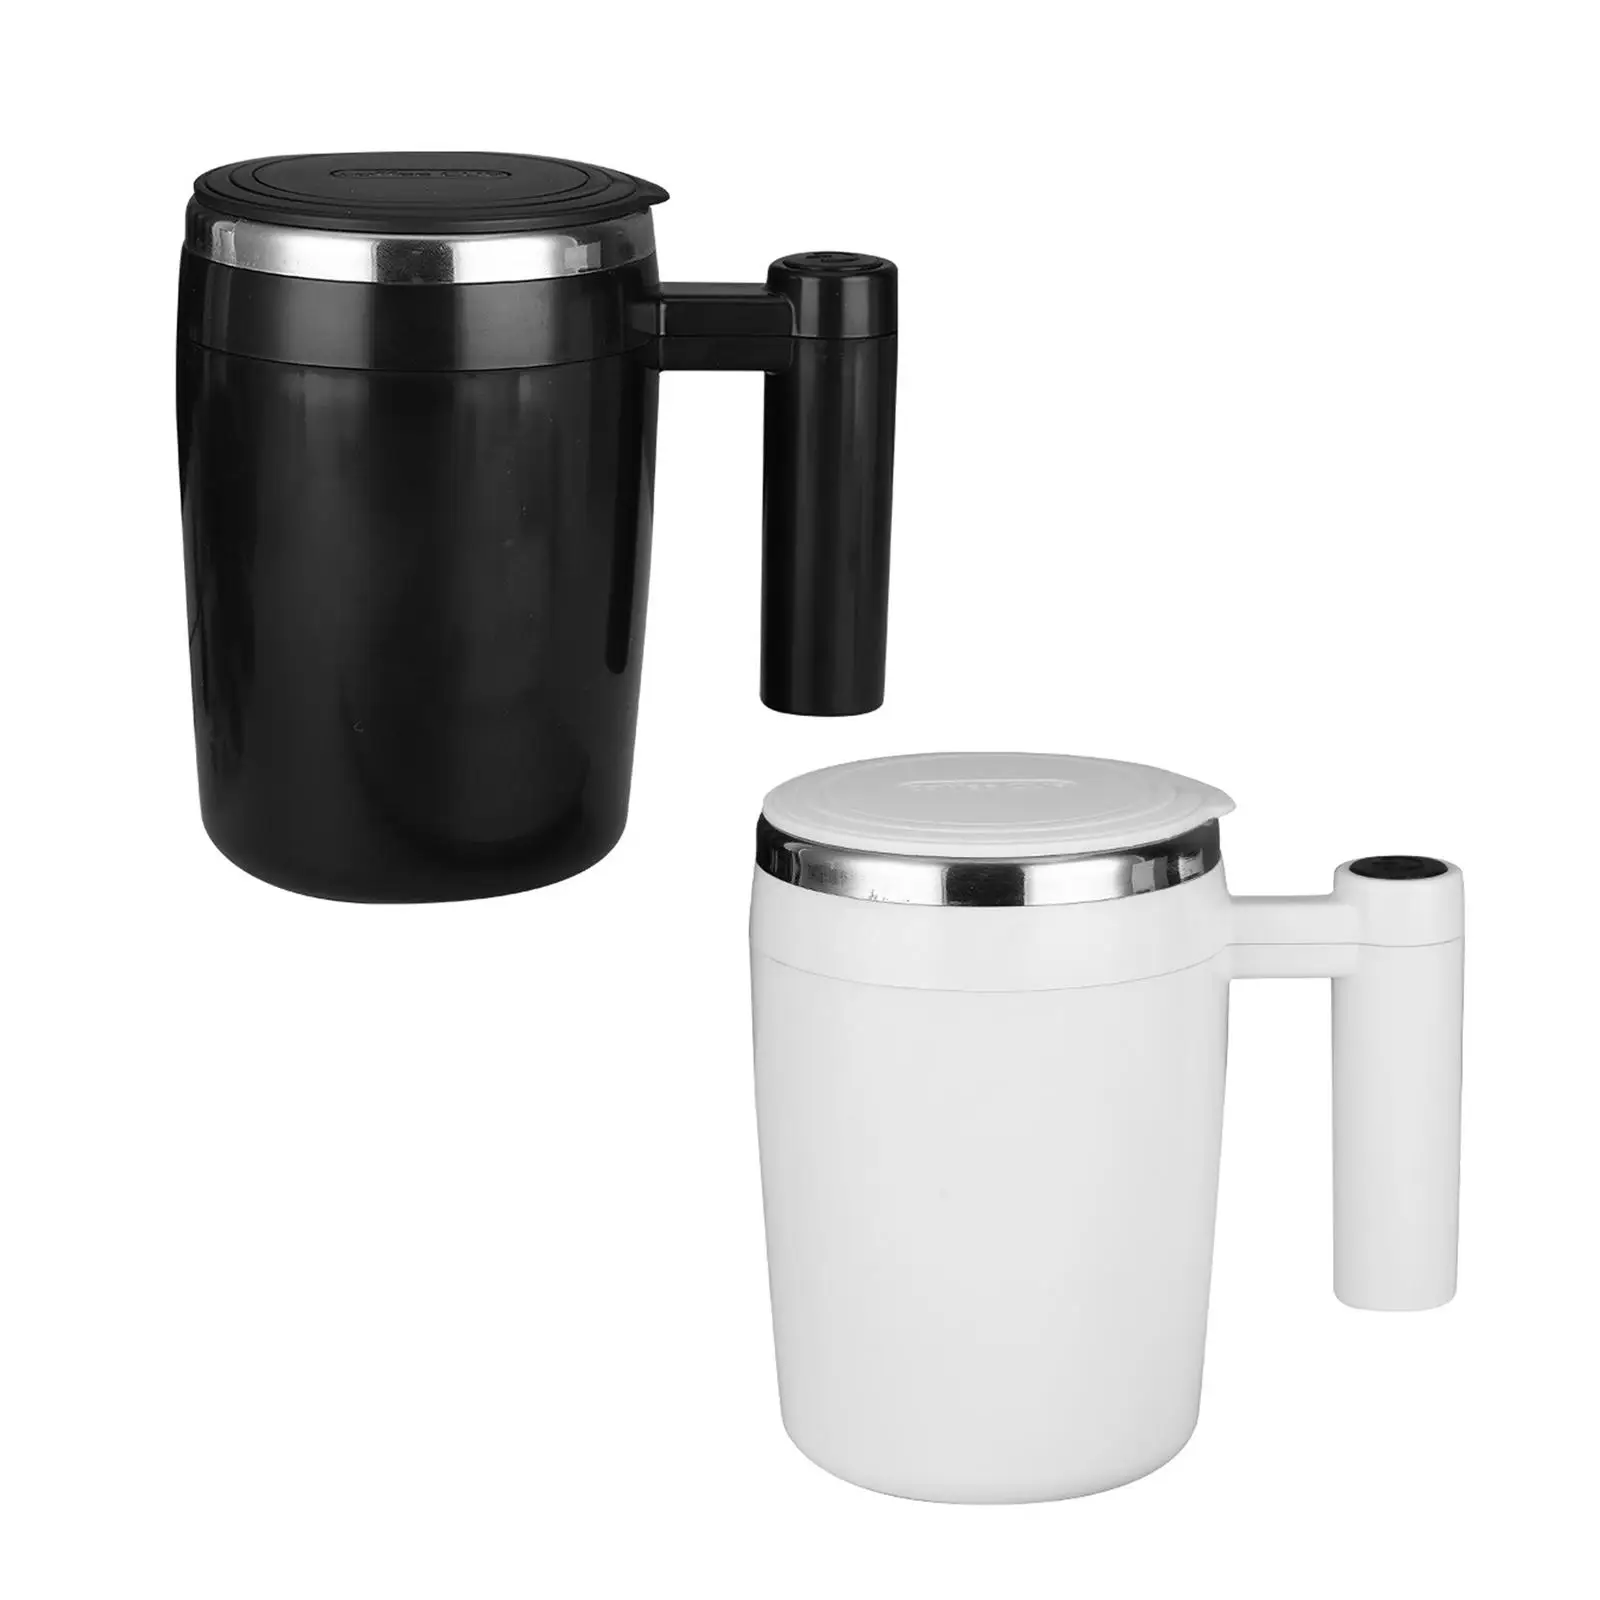 Self Stirring Mug for Coffee, Milk,and Other Beverages Stainless Steel Electric Self Mixing Coffee Tumbler for Travel Office